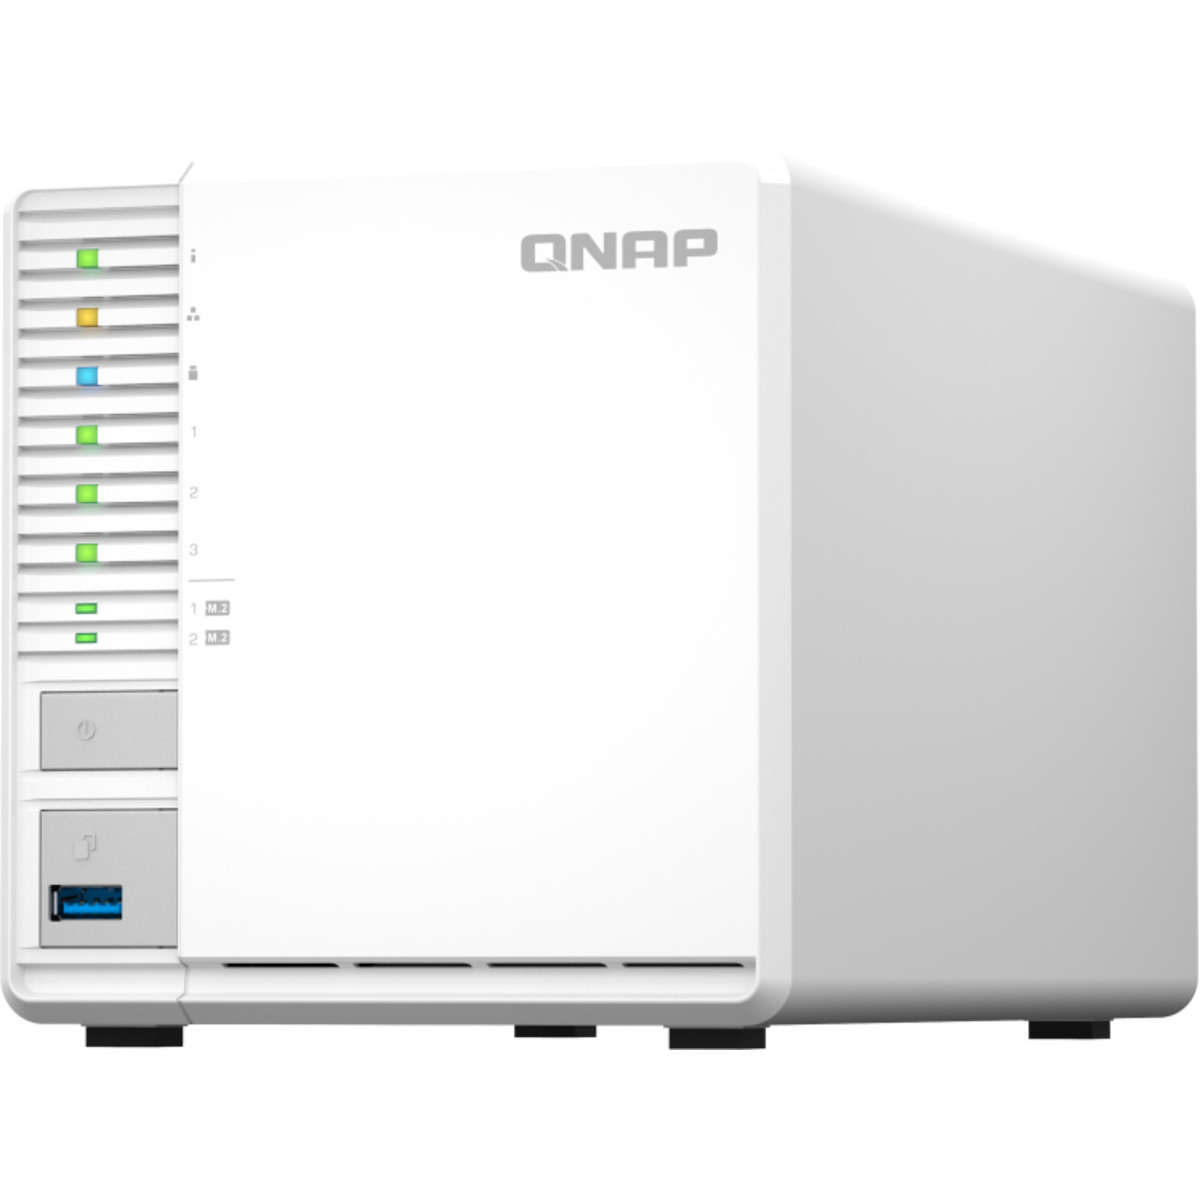 QNAP TS-364 18tb 3-Bay Desktop Multimedia / Power User / Business NAS - Network Attached Storage Device 3x6tb Western Digital Red Plus WD60EFPX 3.5 5640rpm SATA 6Gb/s HDD NAS Class Drives Installed - Burn-In Tested TS-364